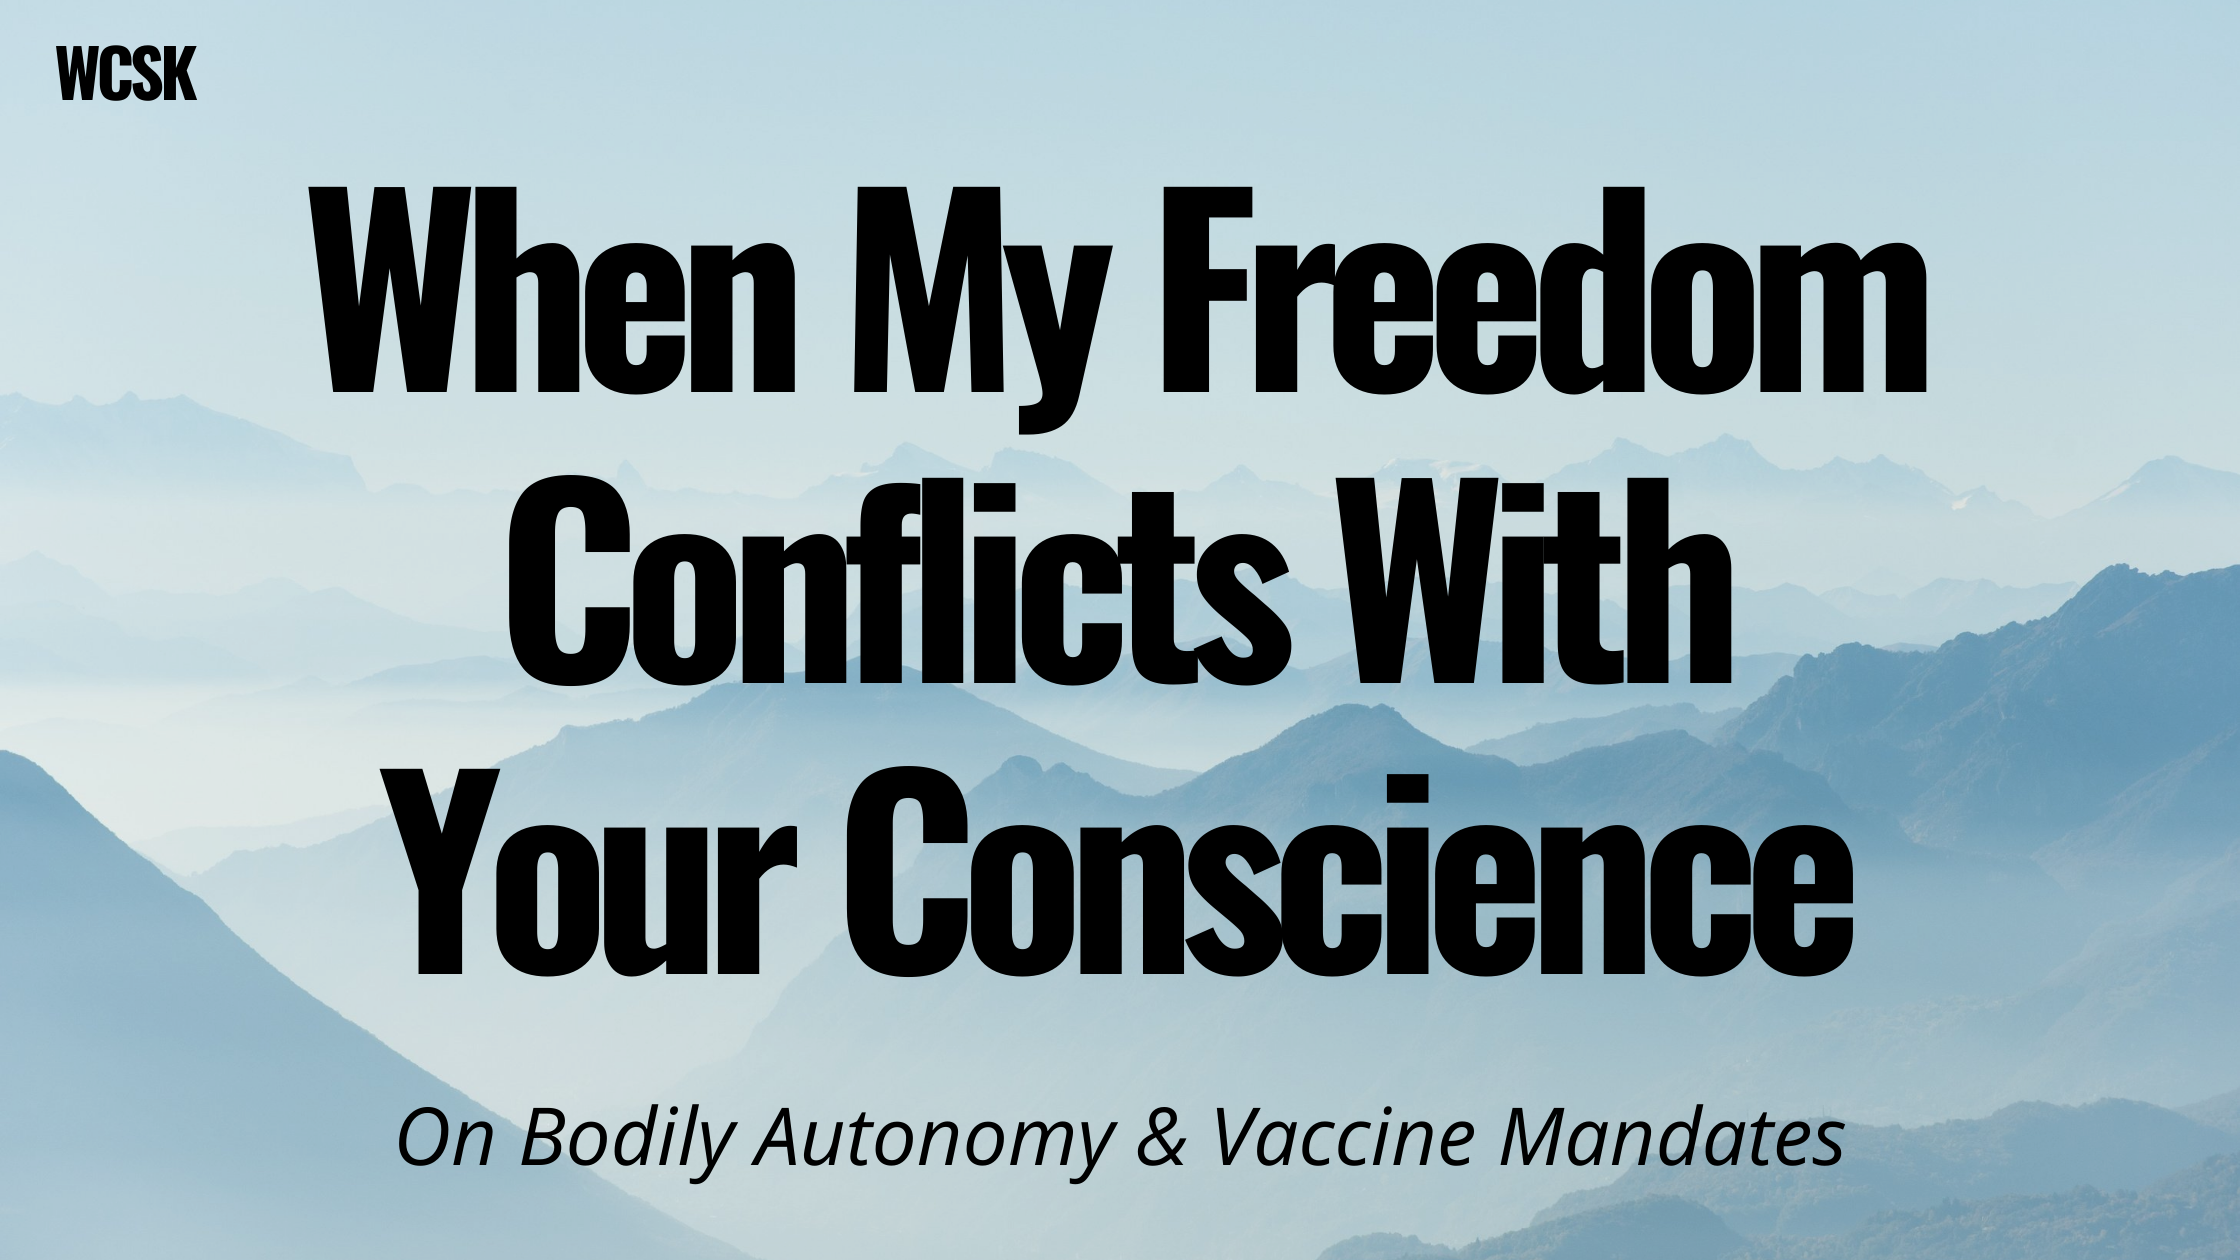 When My Freedom Conflicts With Your Conscience (On Bodily Autonomy & Vaccine Mandates)